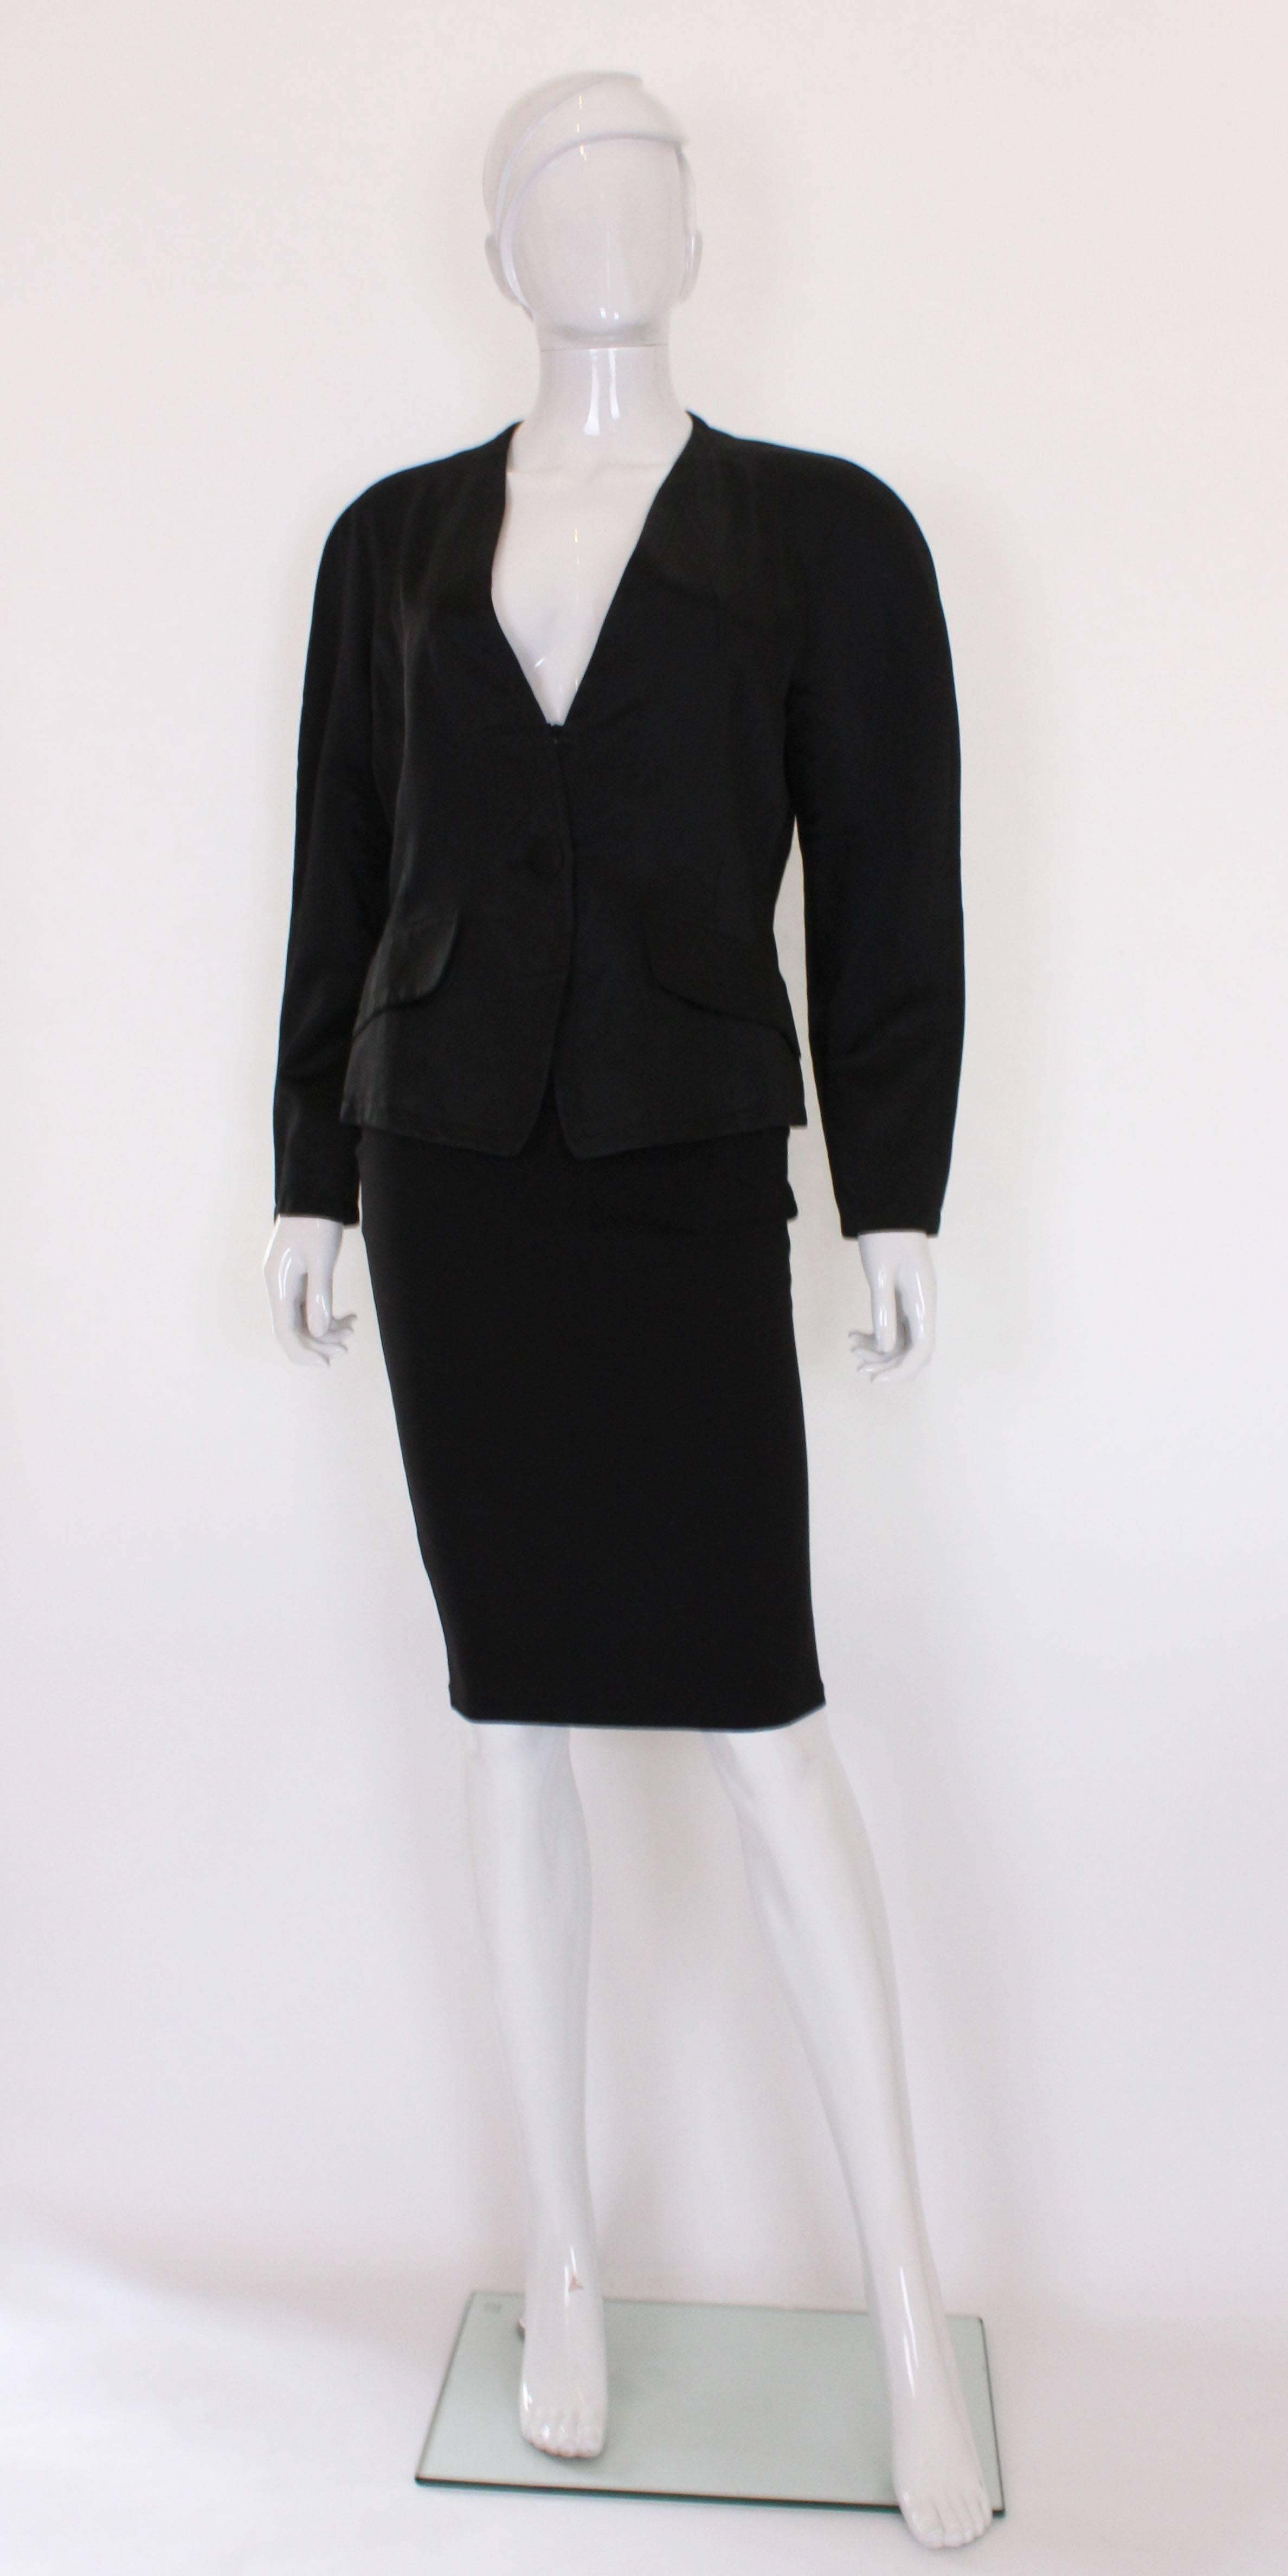 A great black evening jacket from Yves Saint Laurent , Variation line.
This jacket has soft shoulders, is collarless with a v neckline and has a central button and ribbon fastening.